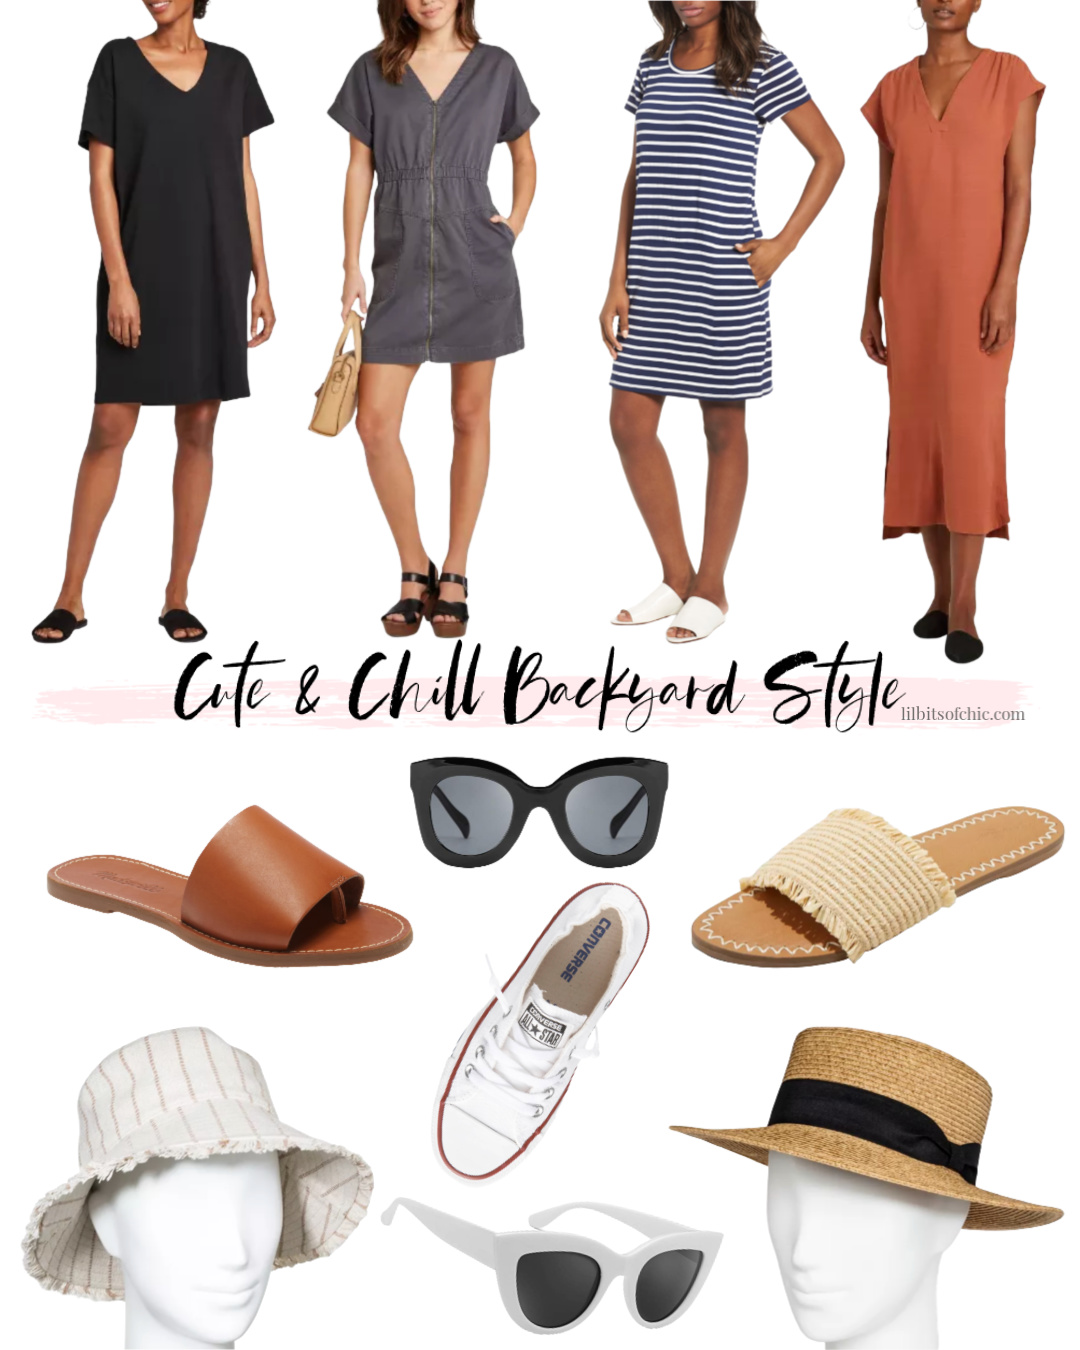 Chill Outfits for hanging out in backyard in San Diego, cute and chill backyard style, my cute and chill outfit essentials